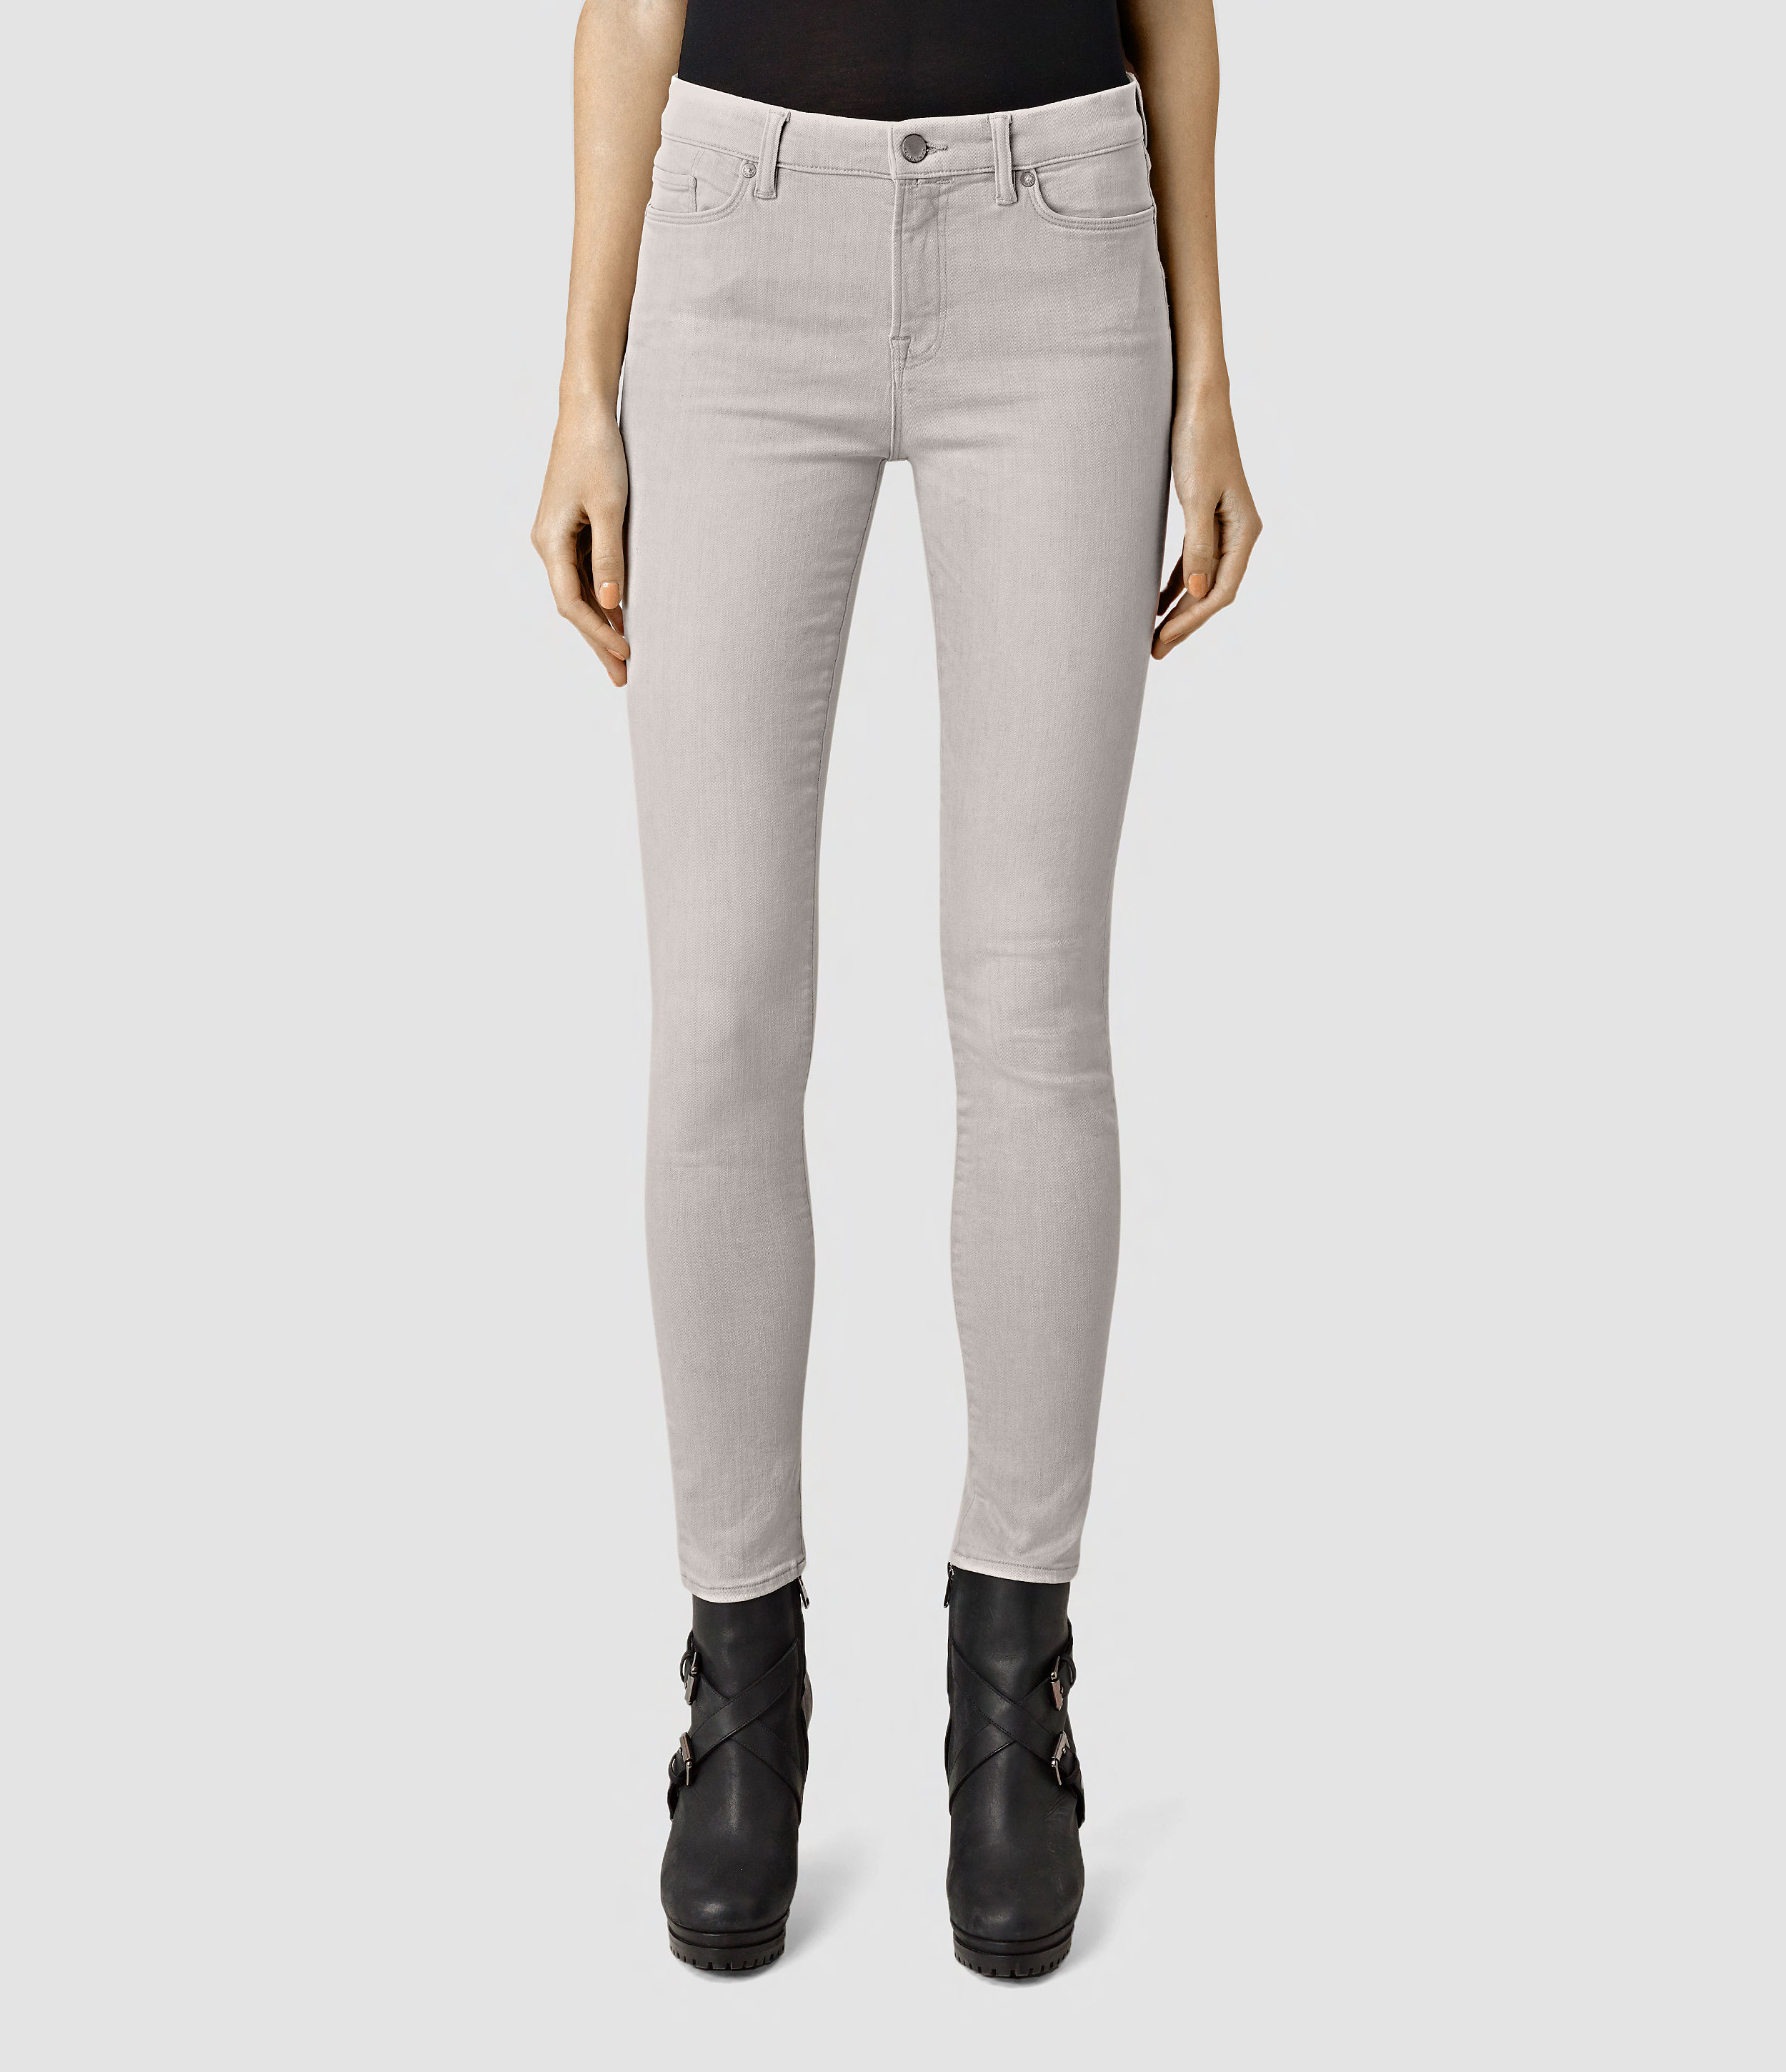 pale grey jeans womens